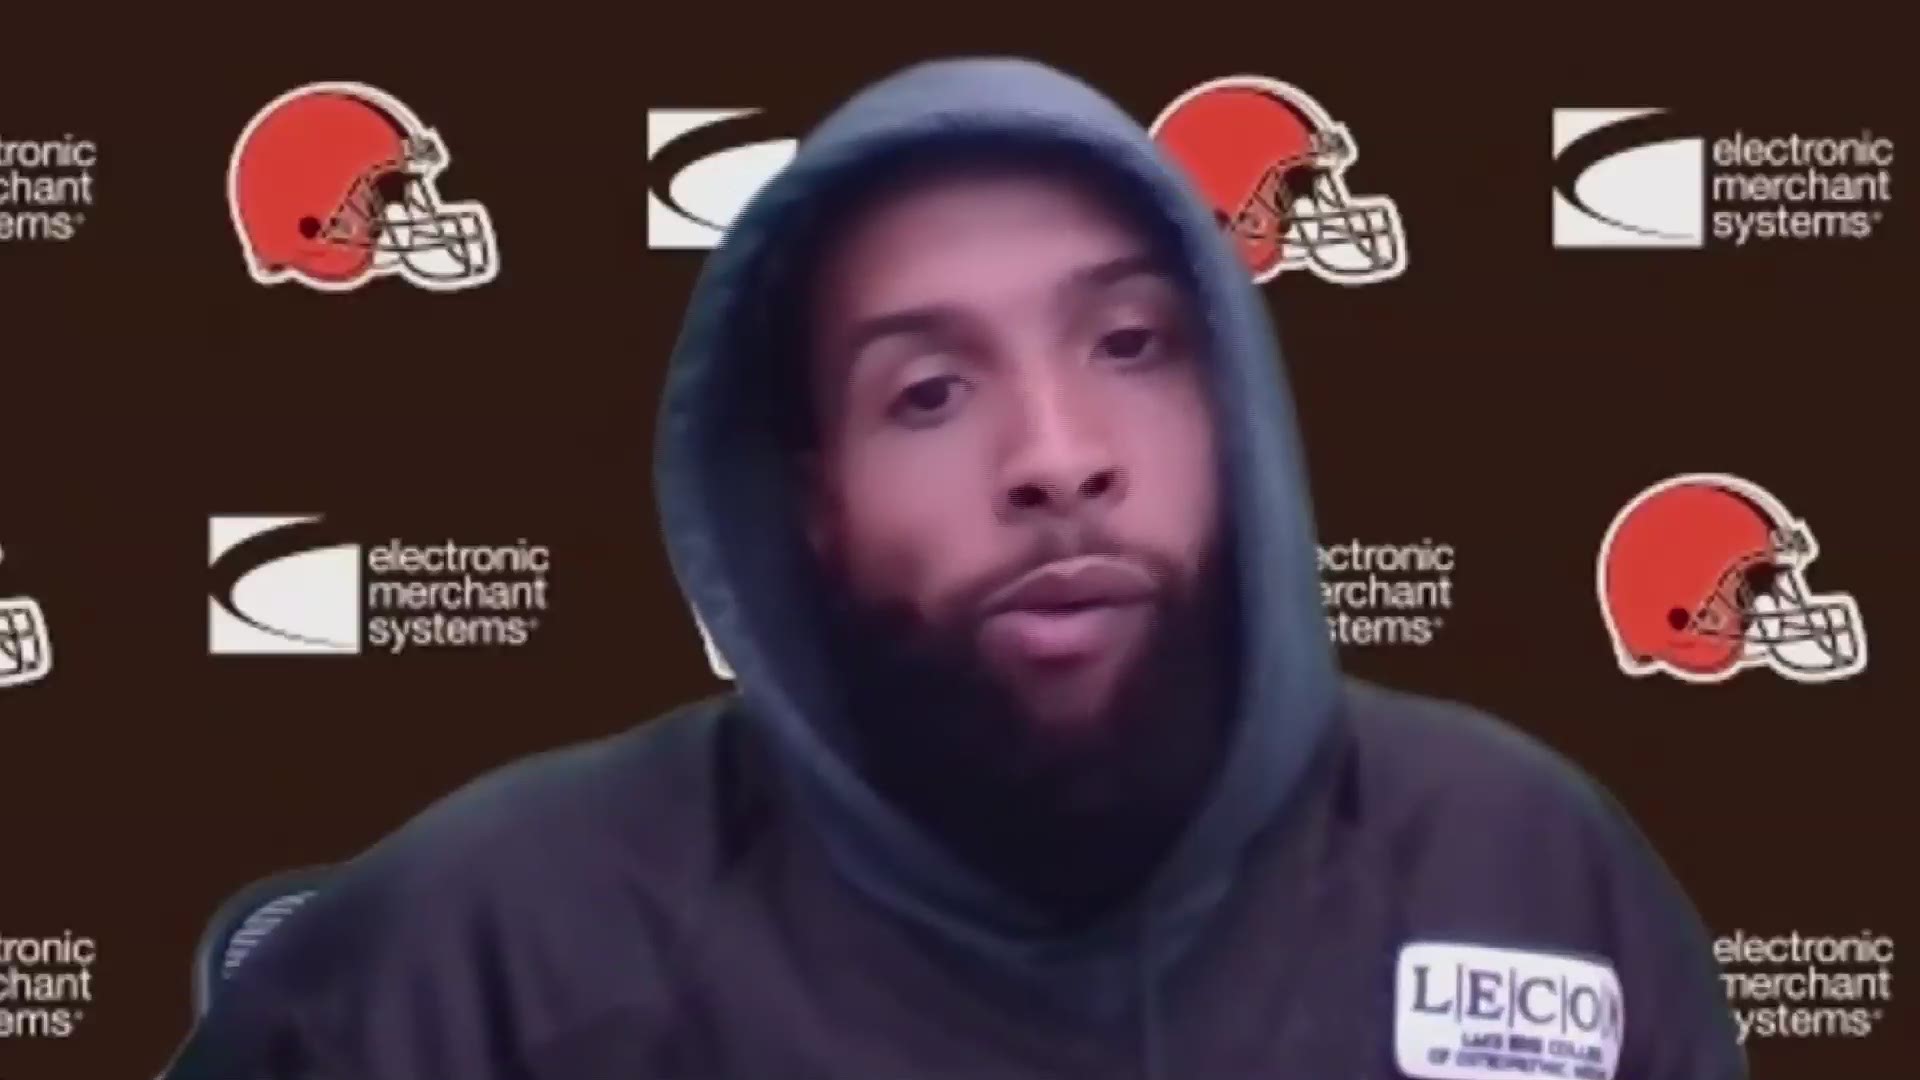 Last Sunday, Odell was seen on the sidelines yelling at his teammates. Odell said he was mad because they were losing and that he was taken out of the game.